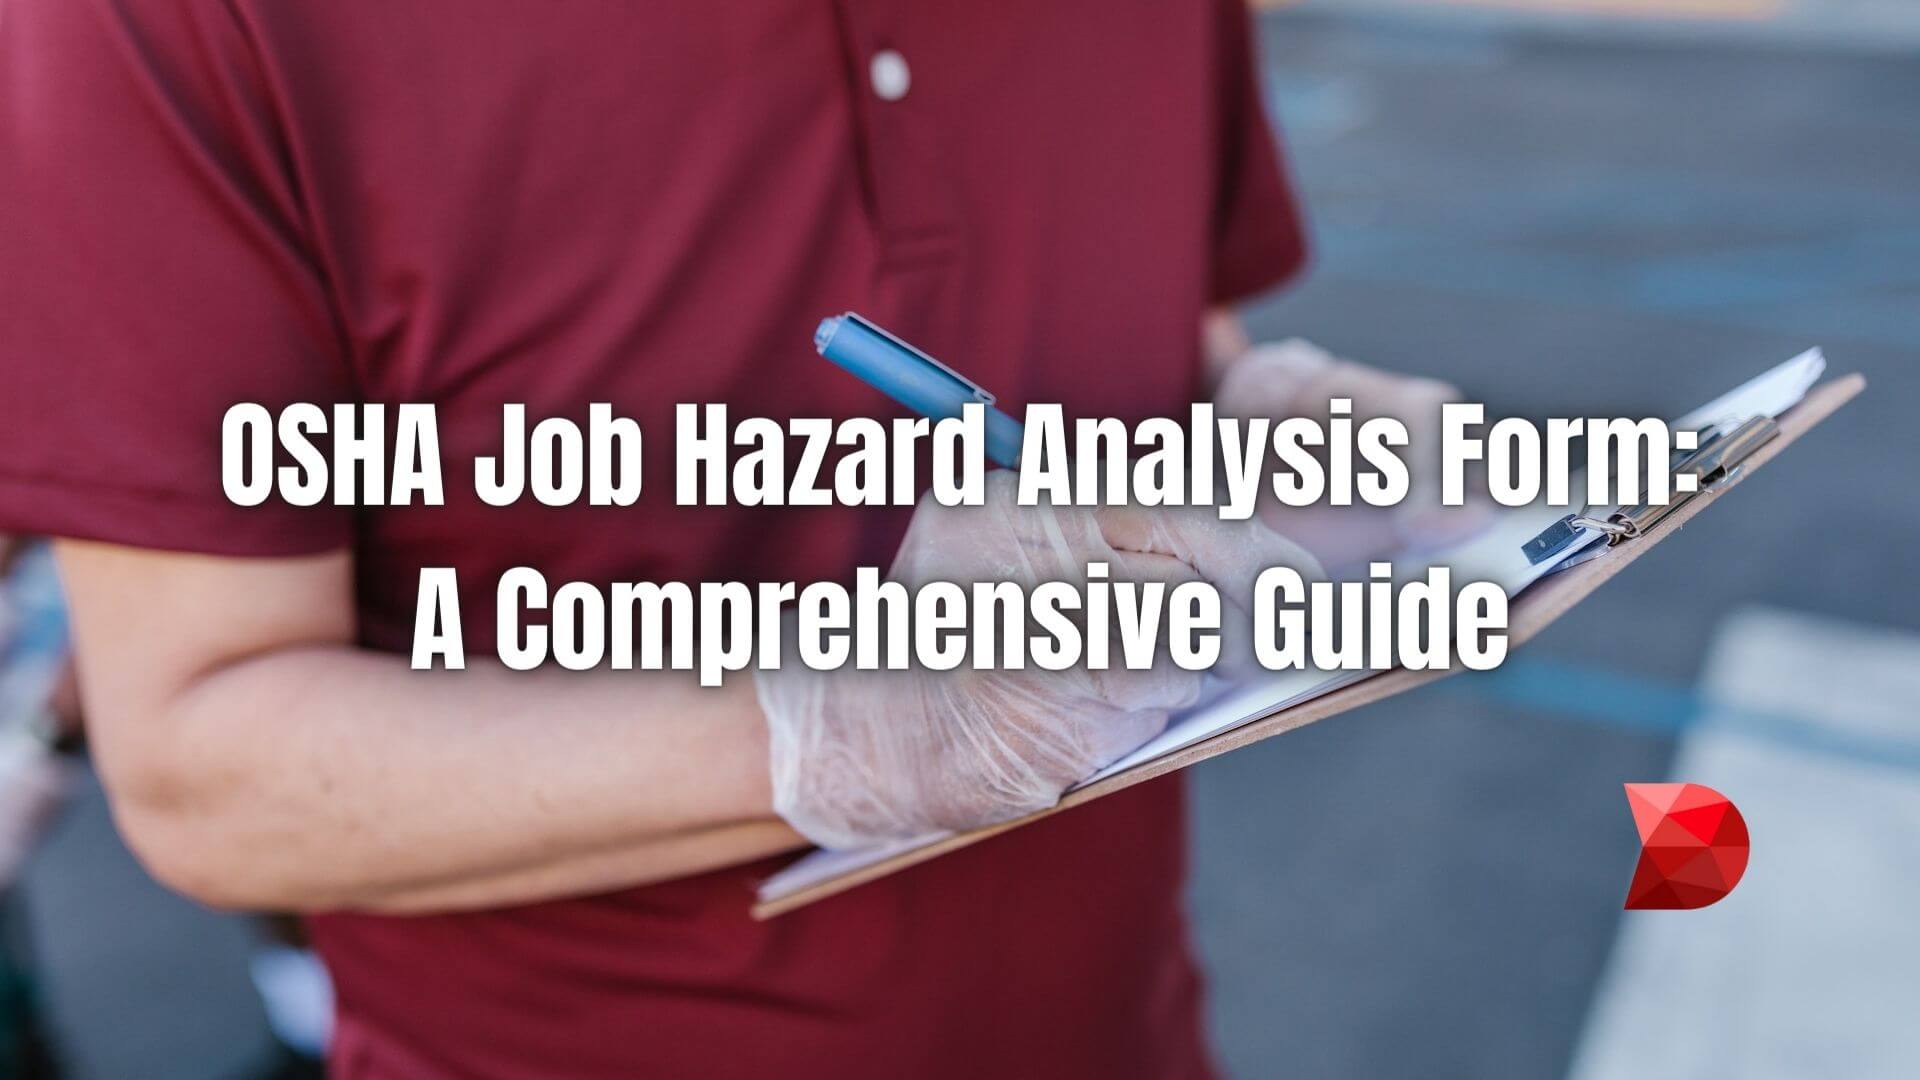 Creating an OSHA Job Hazard Analysis Form Template is crucial to ensuring workplace safety. Click here to learn how to create one!